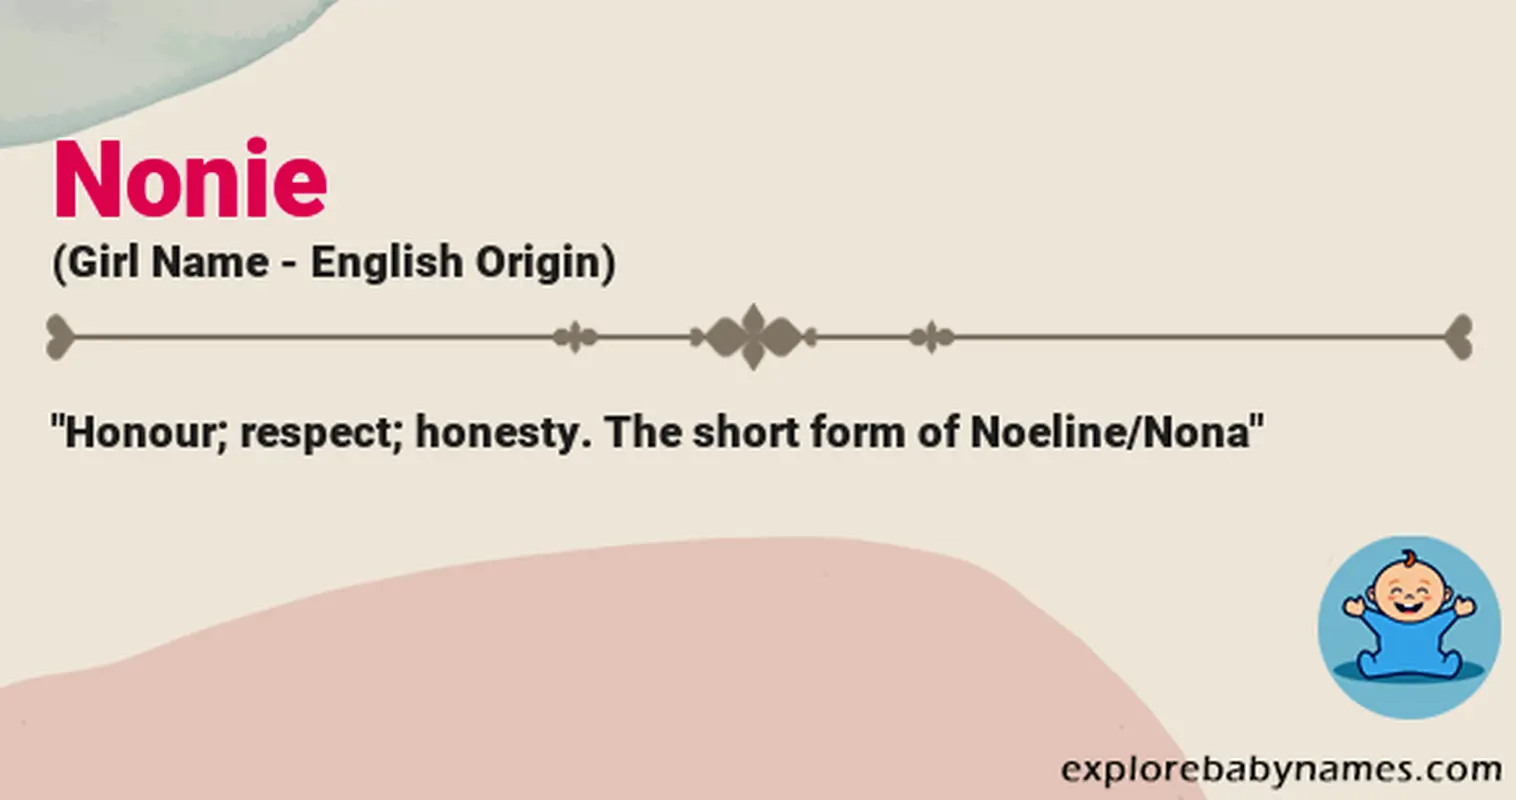 Meaning of Nonie